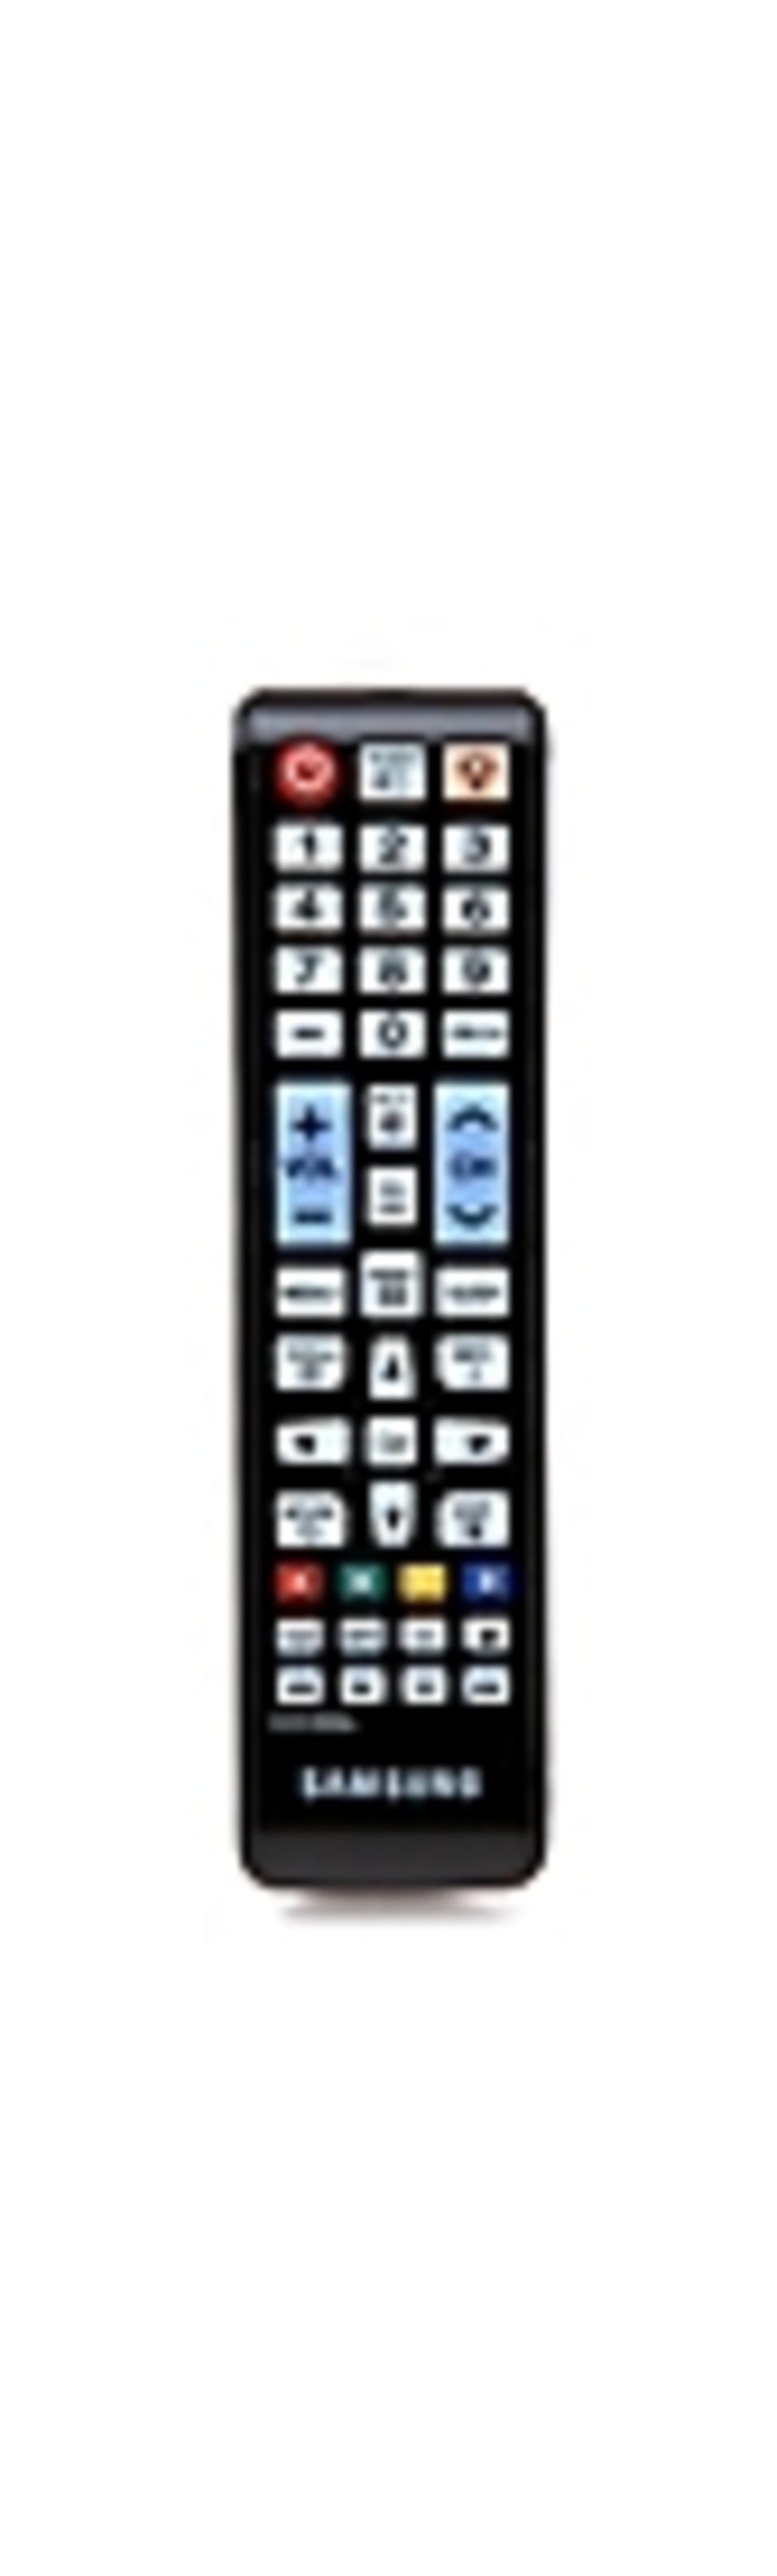 Samsung AA59-00600A Remote Control - 2 x AAA (Not Included)